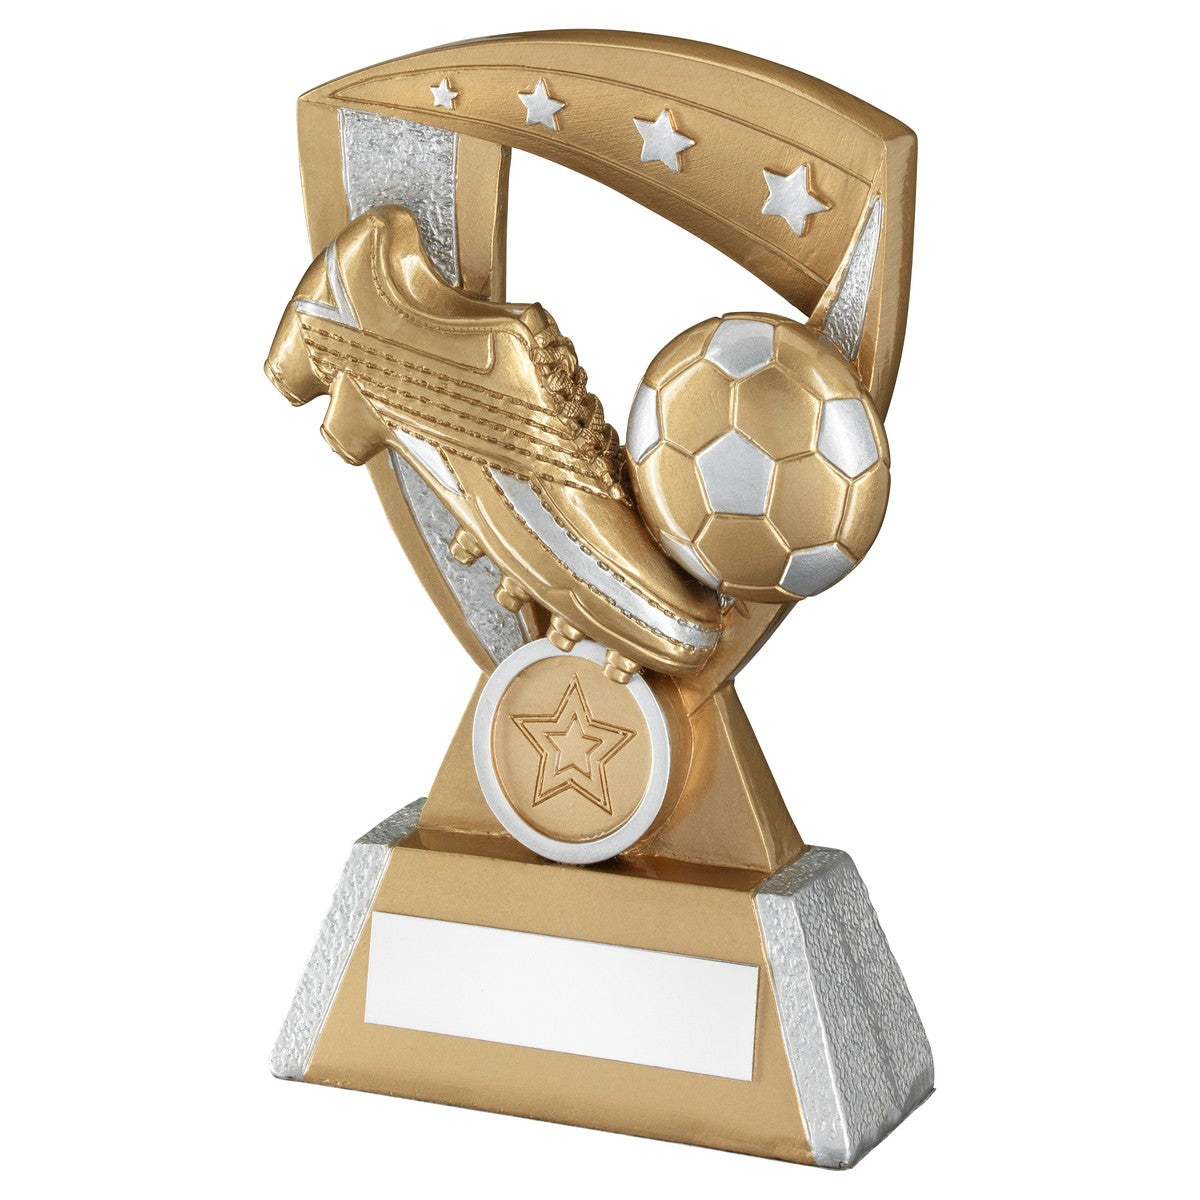 Football And Boot On 4 Star Shield Trophy